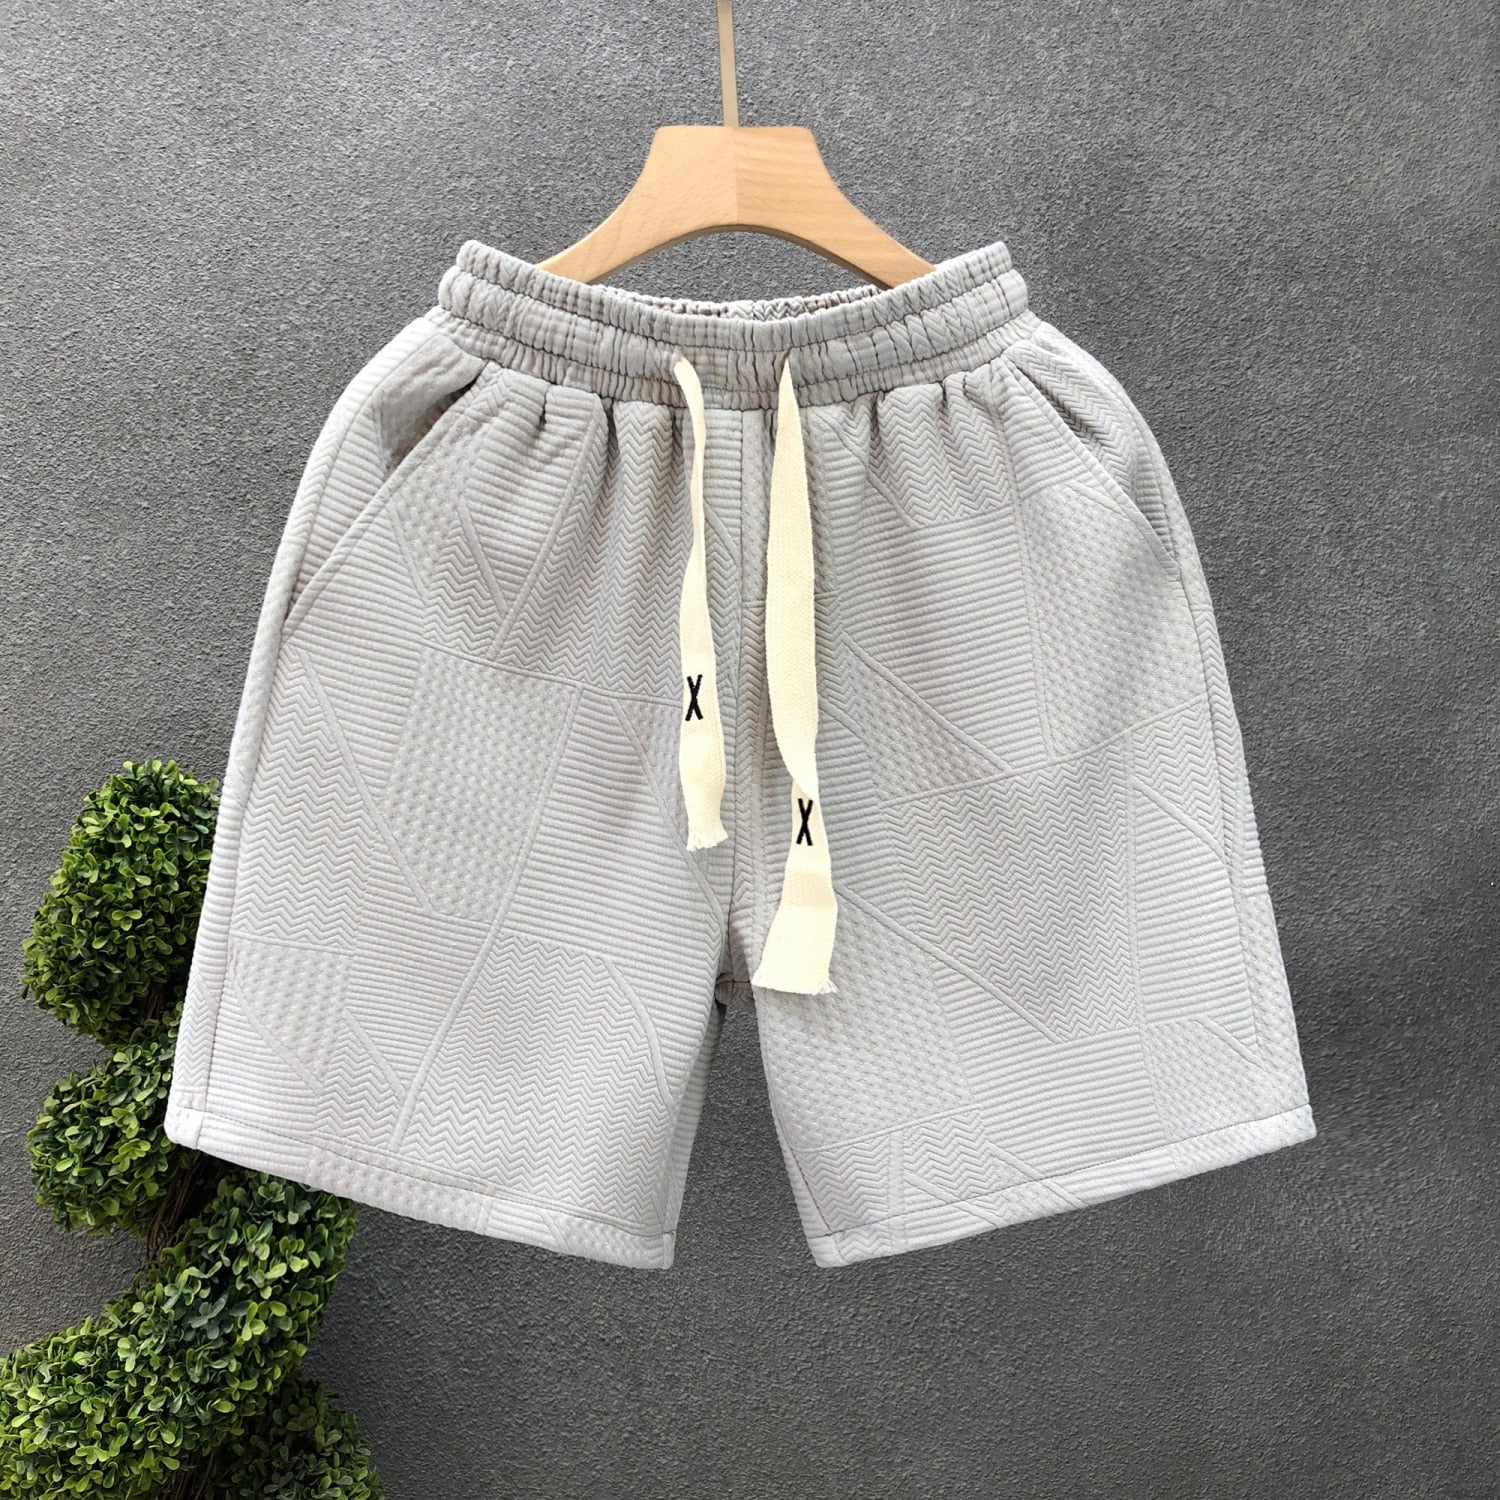 Fashion Simple Pattern Shorts Men's Summer Loose Drawstring Solid Color Pants Breathable Casual Gym Outdoor Beach Short Pants - Bonnie Lassio